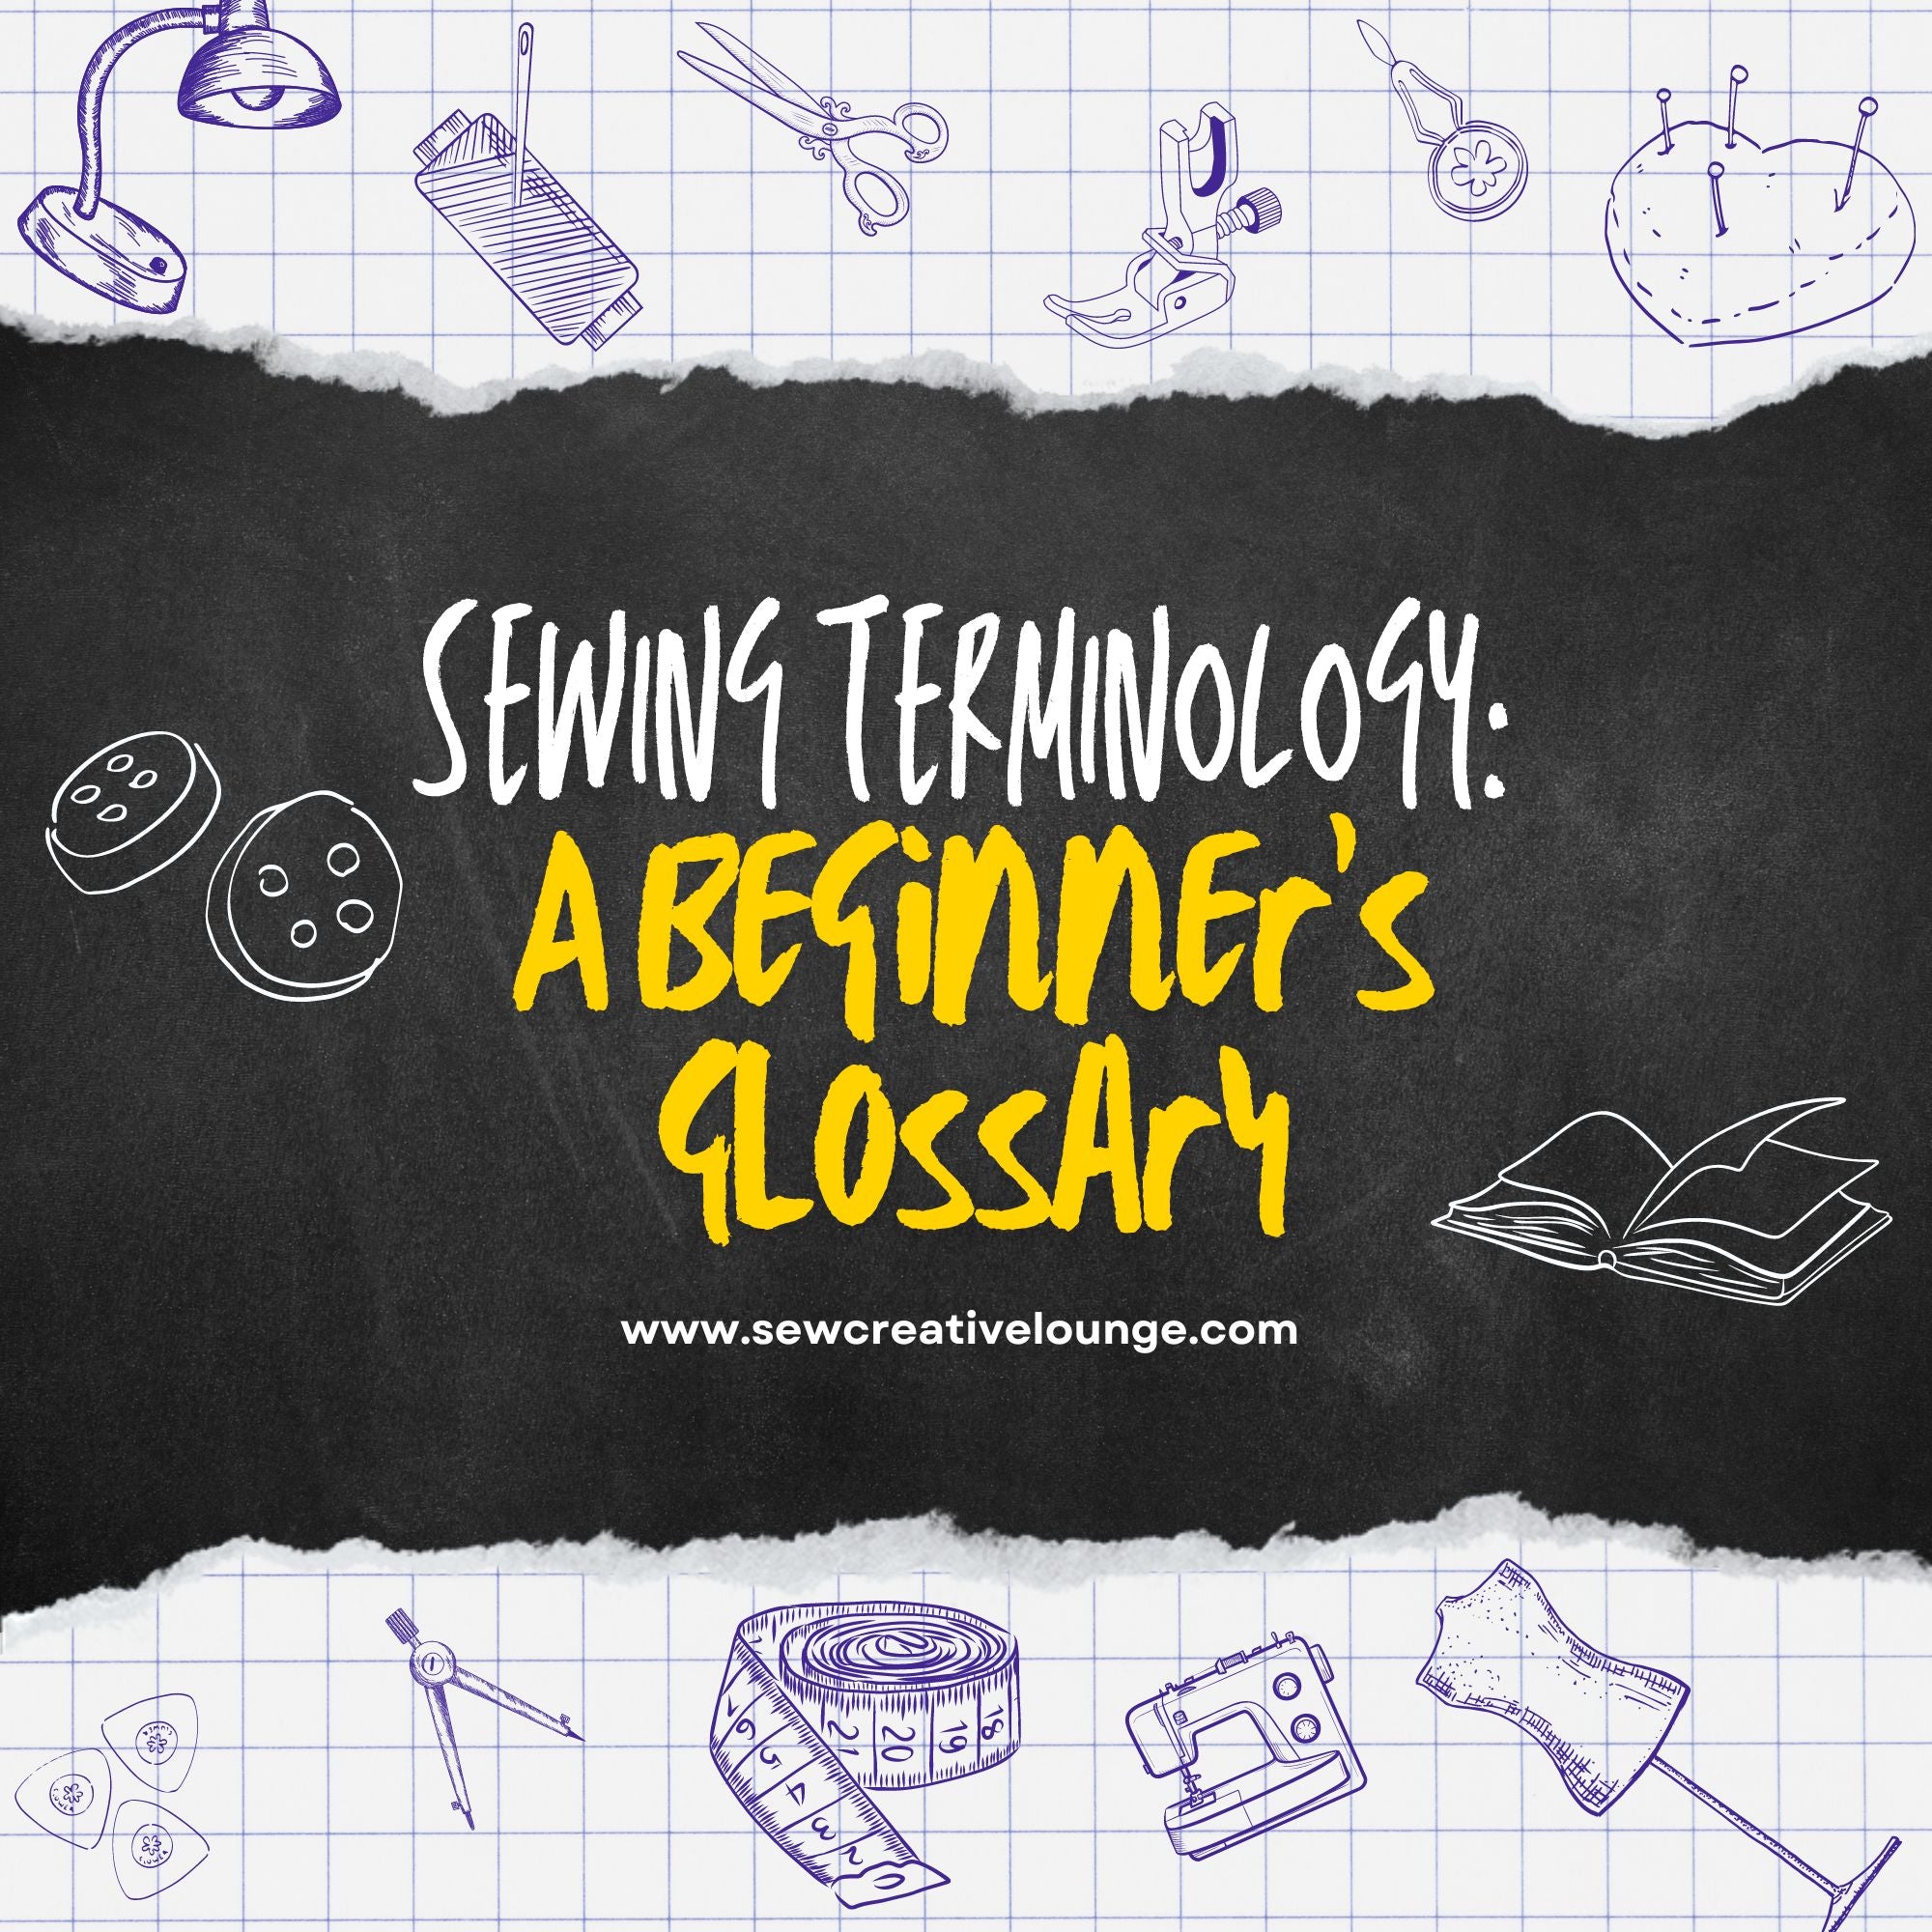 Sewing Terminology: A Beginner's Glossary